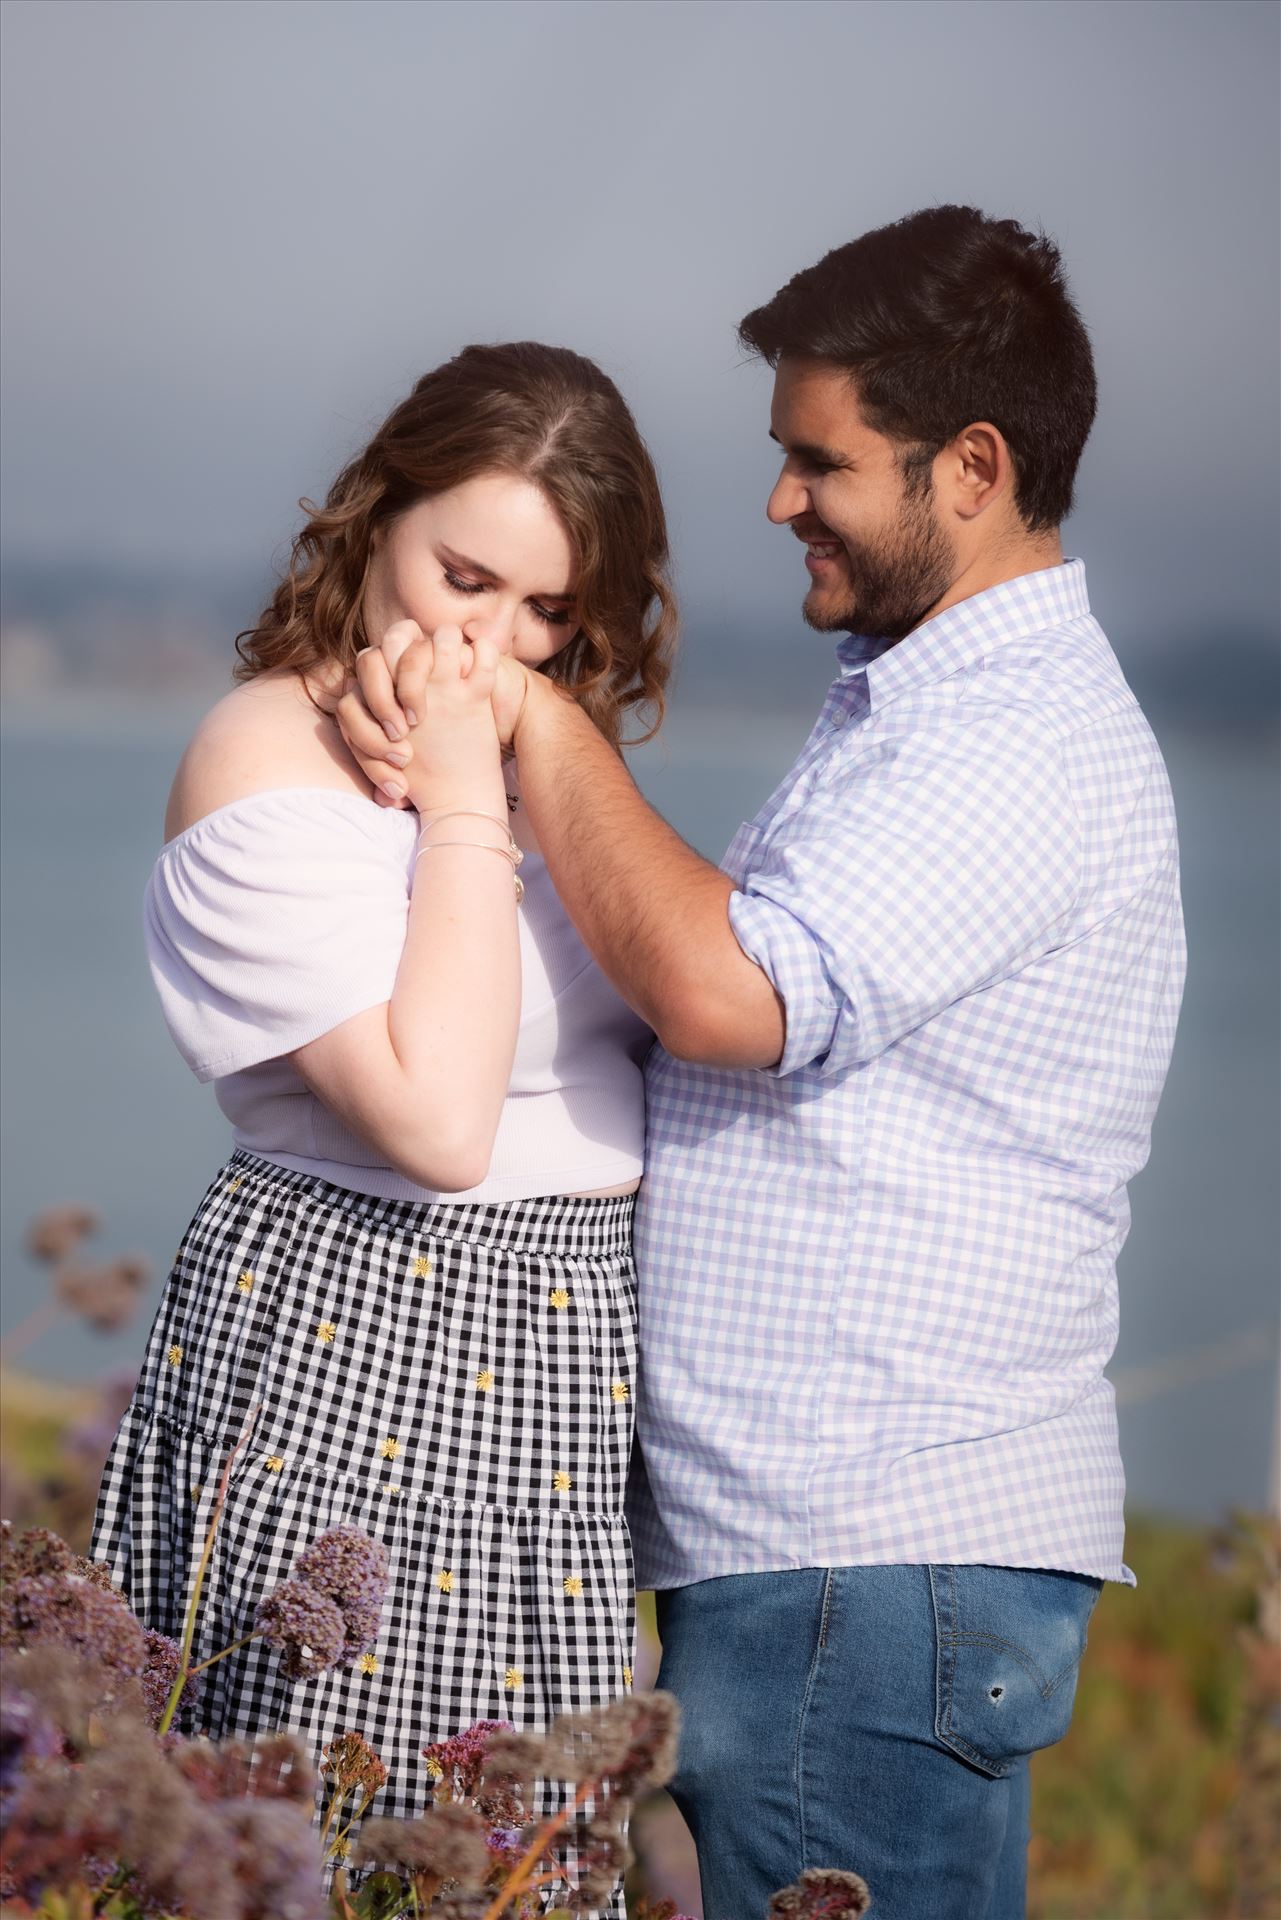 Final-75.JPG - Sarah Williams of Mirror's Edge Photography, a San Luis Obispo Wedding and Engagement Photographer, captures Kara-Leigh and Deaven's amazing Engagement Photography Session at the Dinosaur Caves Park in Pismo Beach California. Girl kisses hand. by Sarah Williams